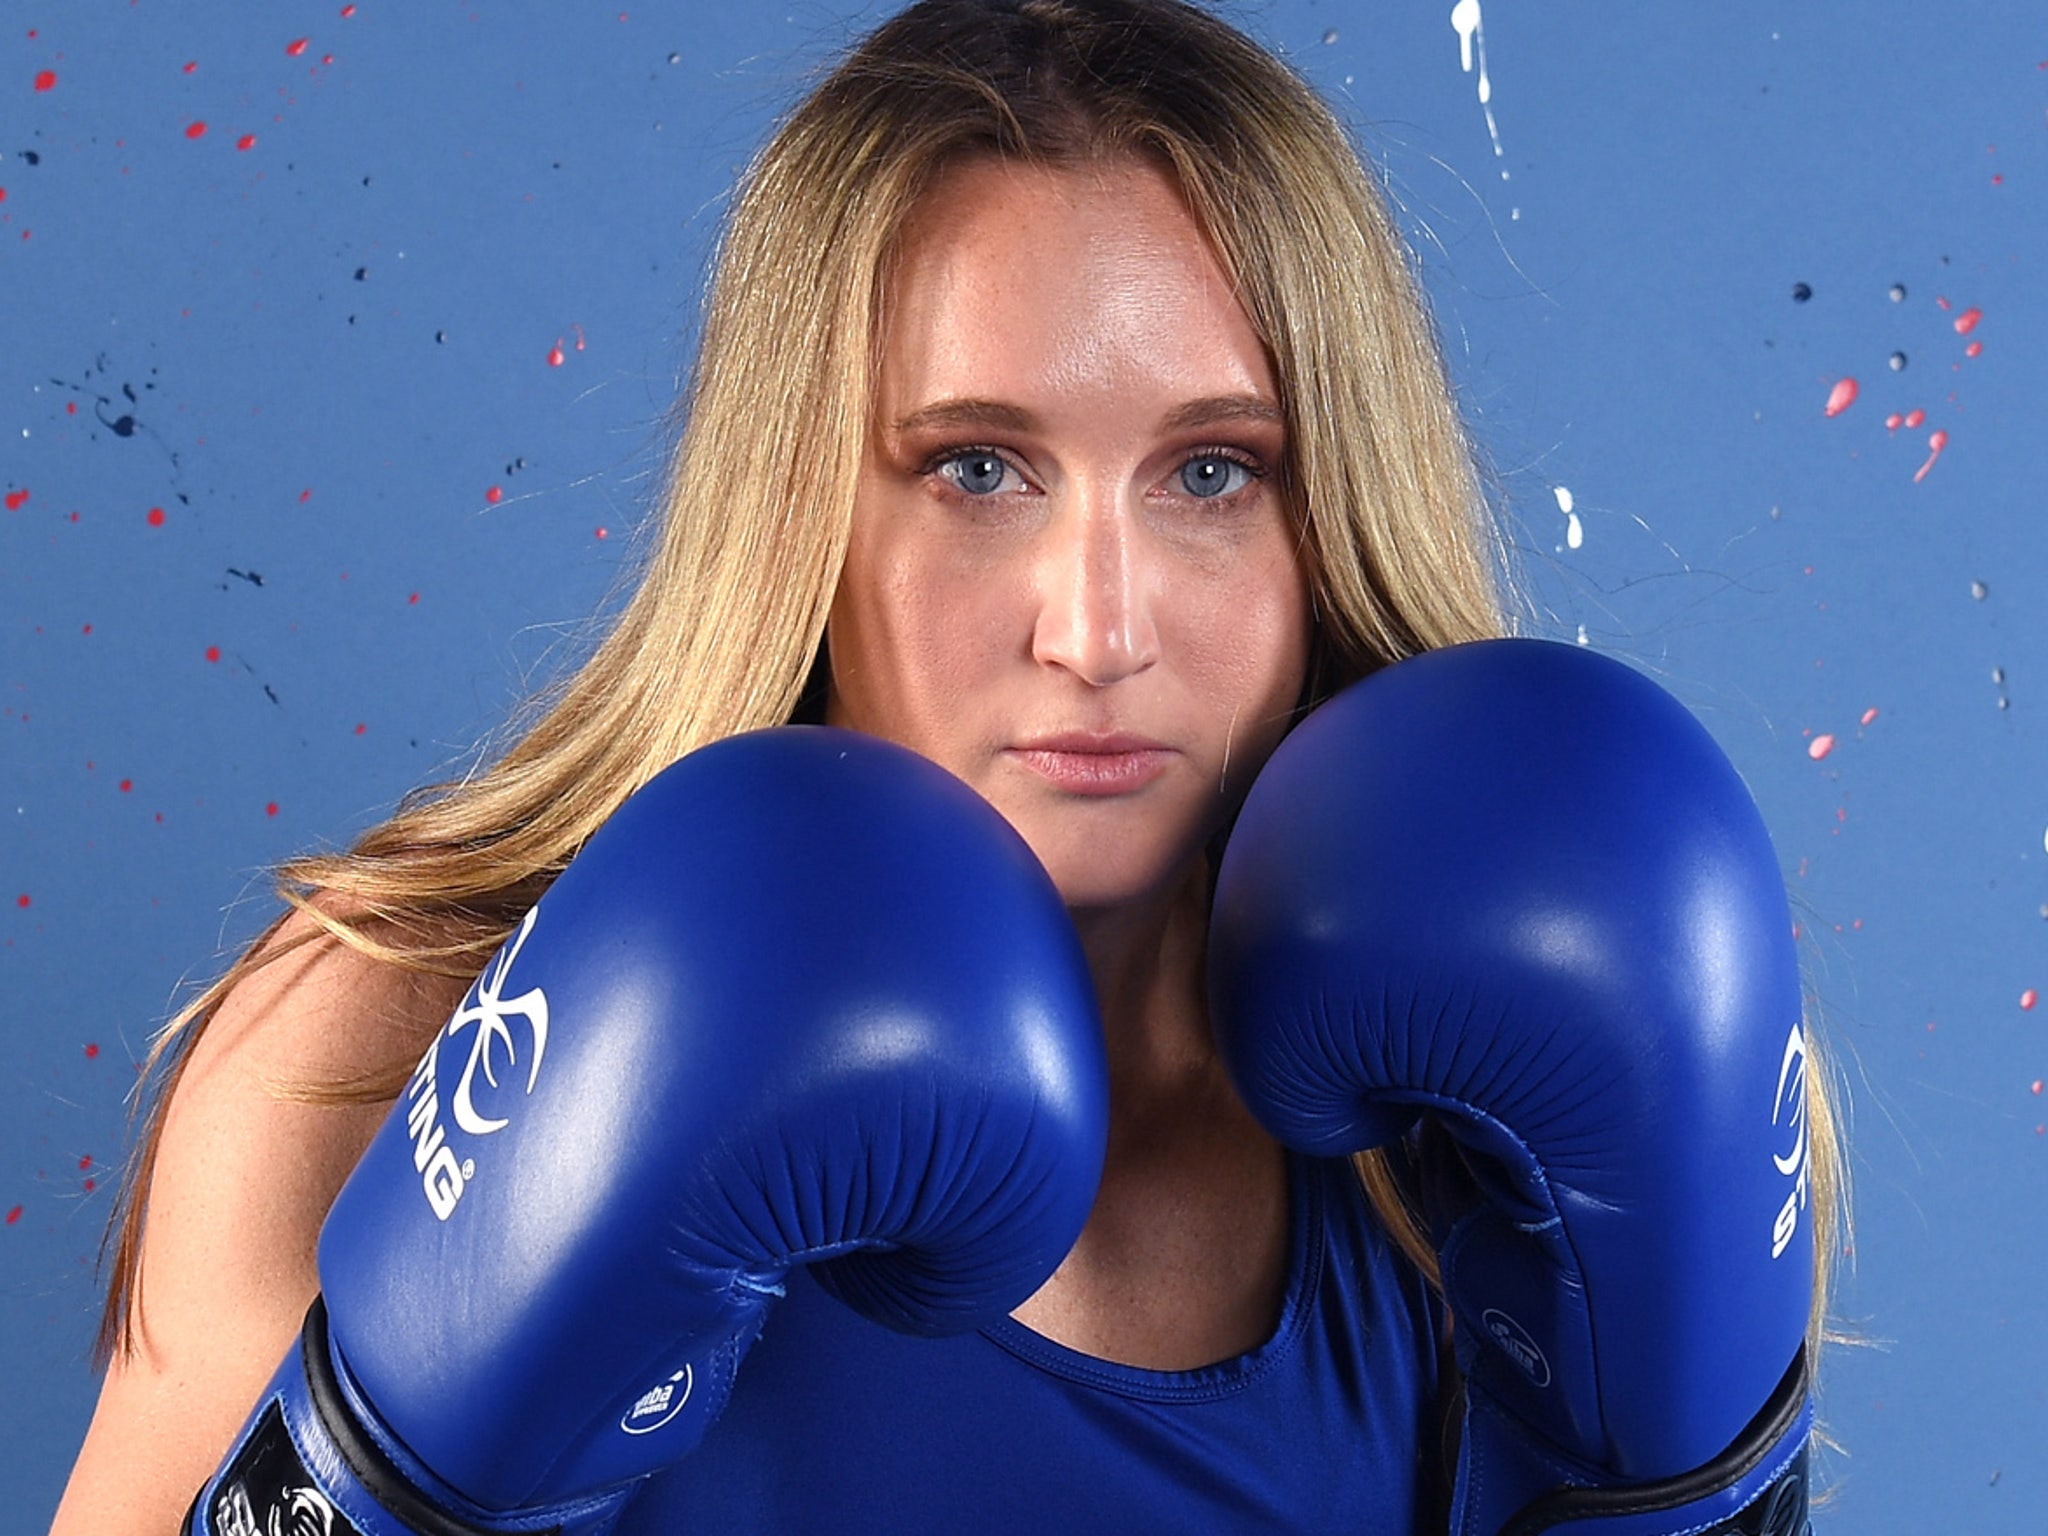 amateur boxer boxing her she